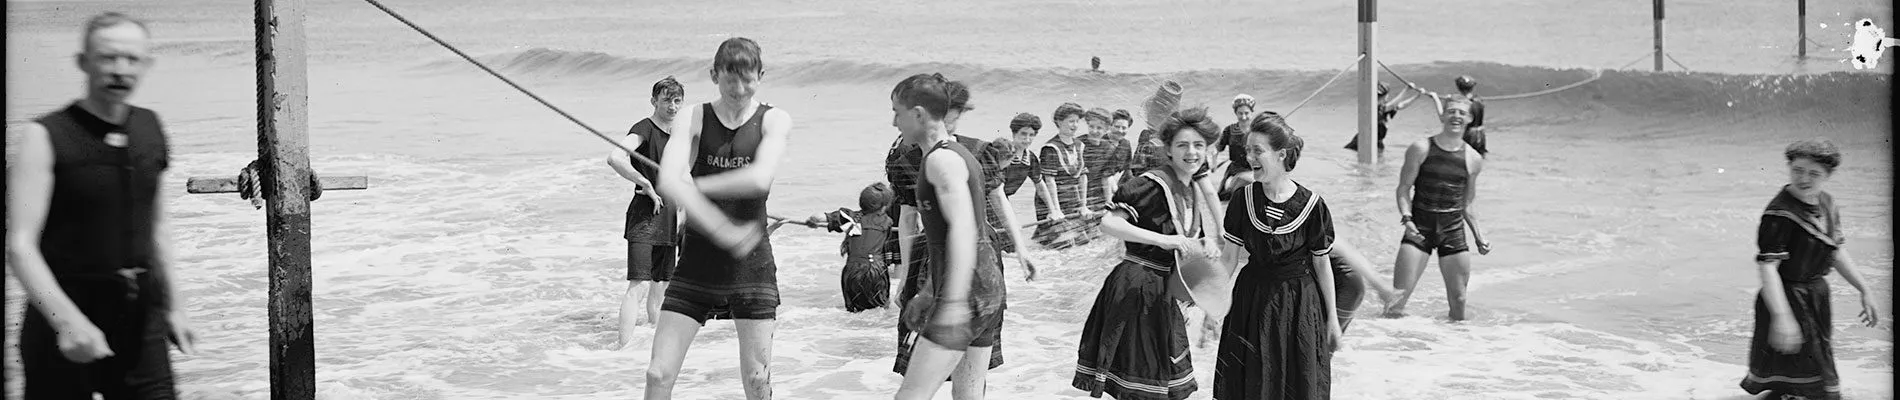 1900x400_Lecture6_Surf-bathing-Between1901-and-1905_LibCongress_-